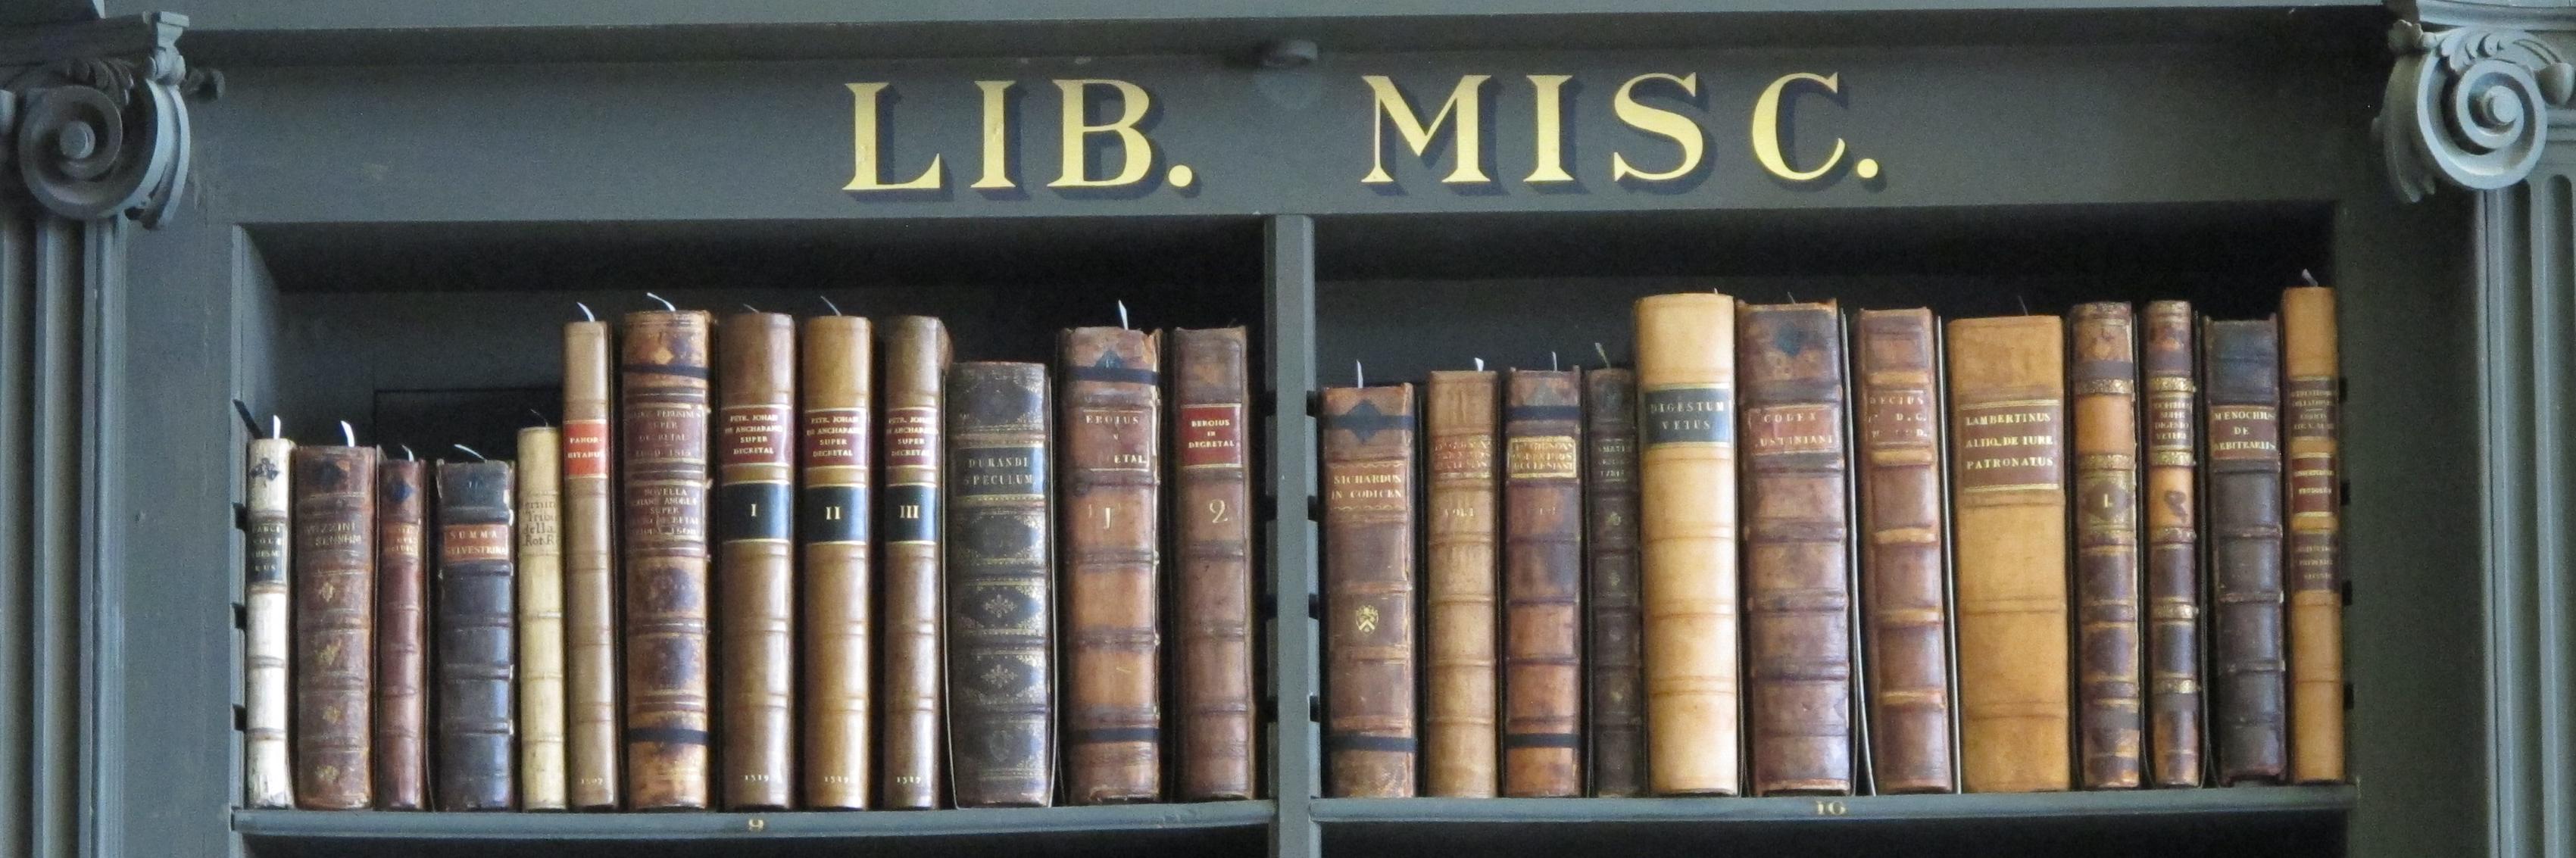 Shelf of books; with label 'Lib. Misc' above